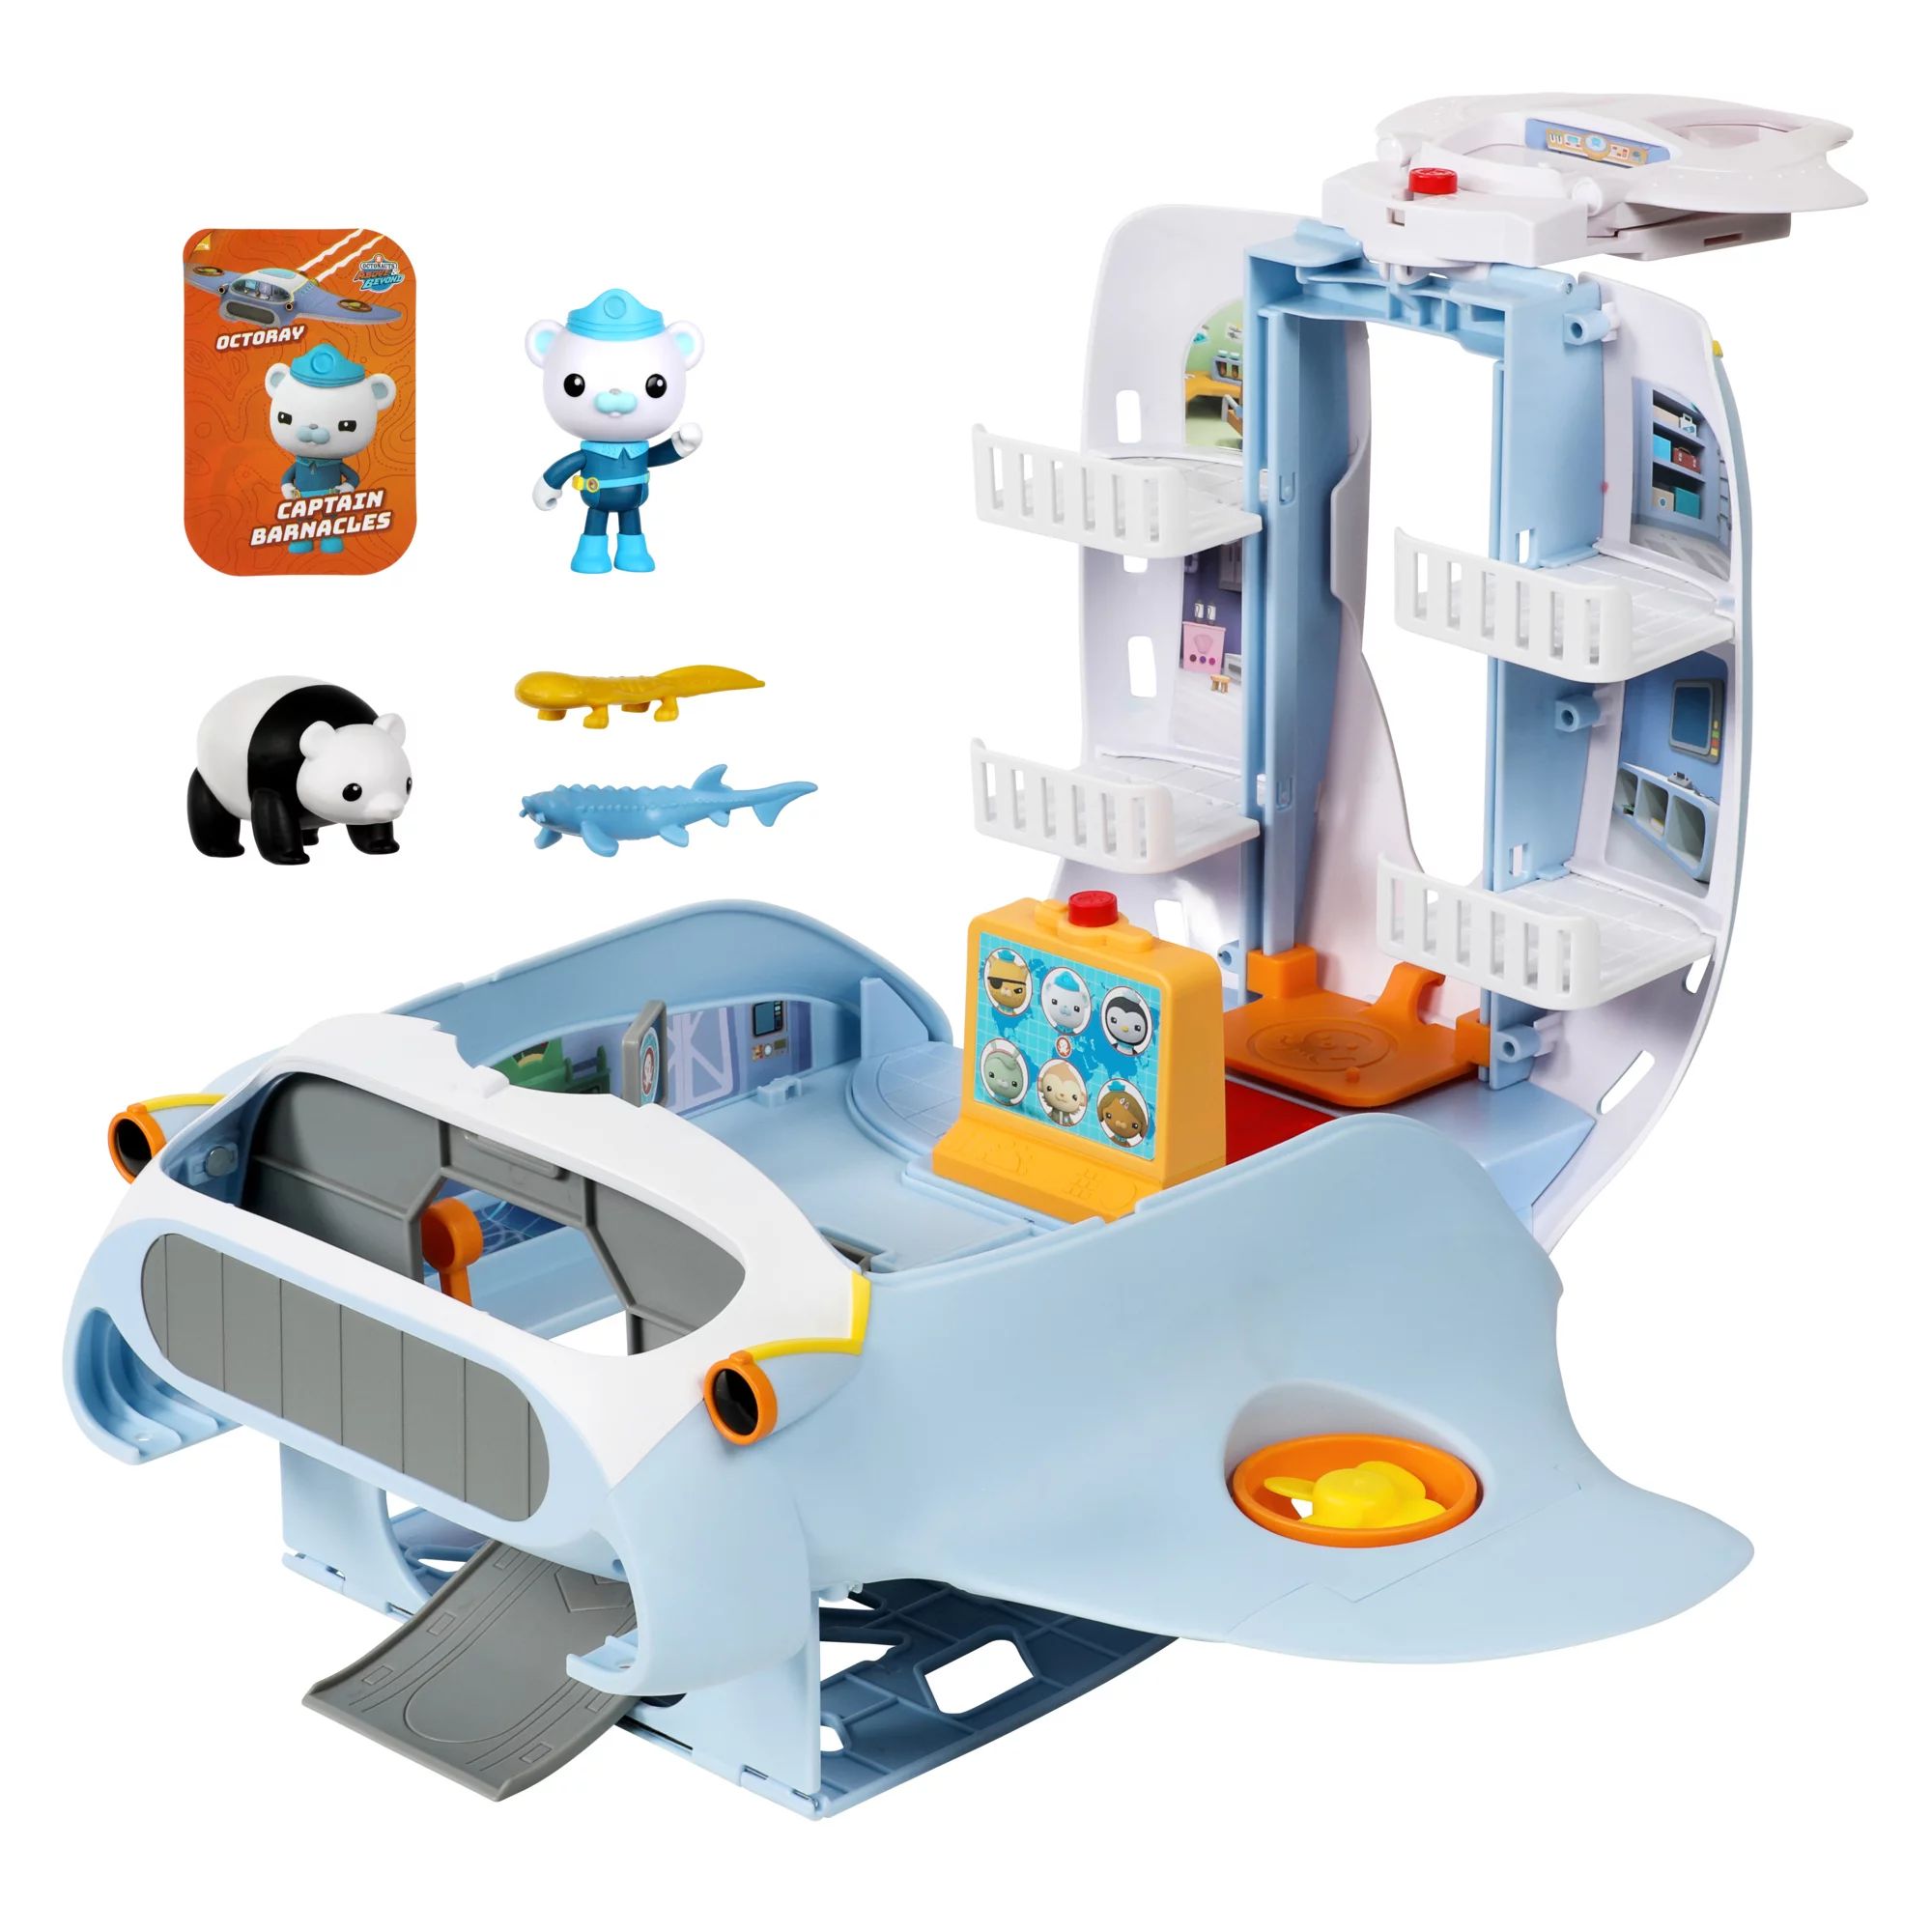 Octonauts Above & Beyond, Octoray 13 inch Transforming Playset with Captain Barnacles 3 inch Figu... | Walmart (US)